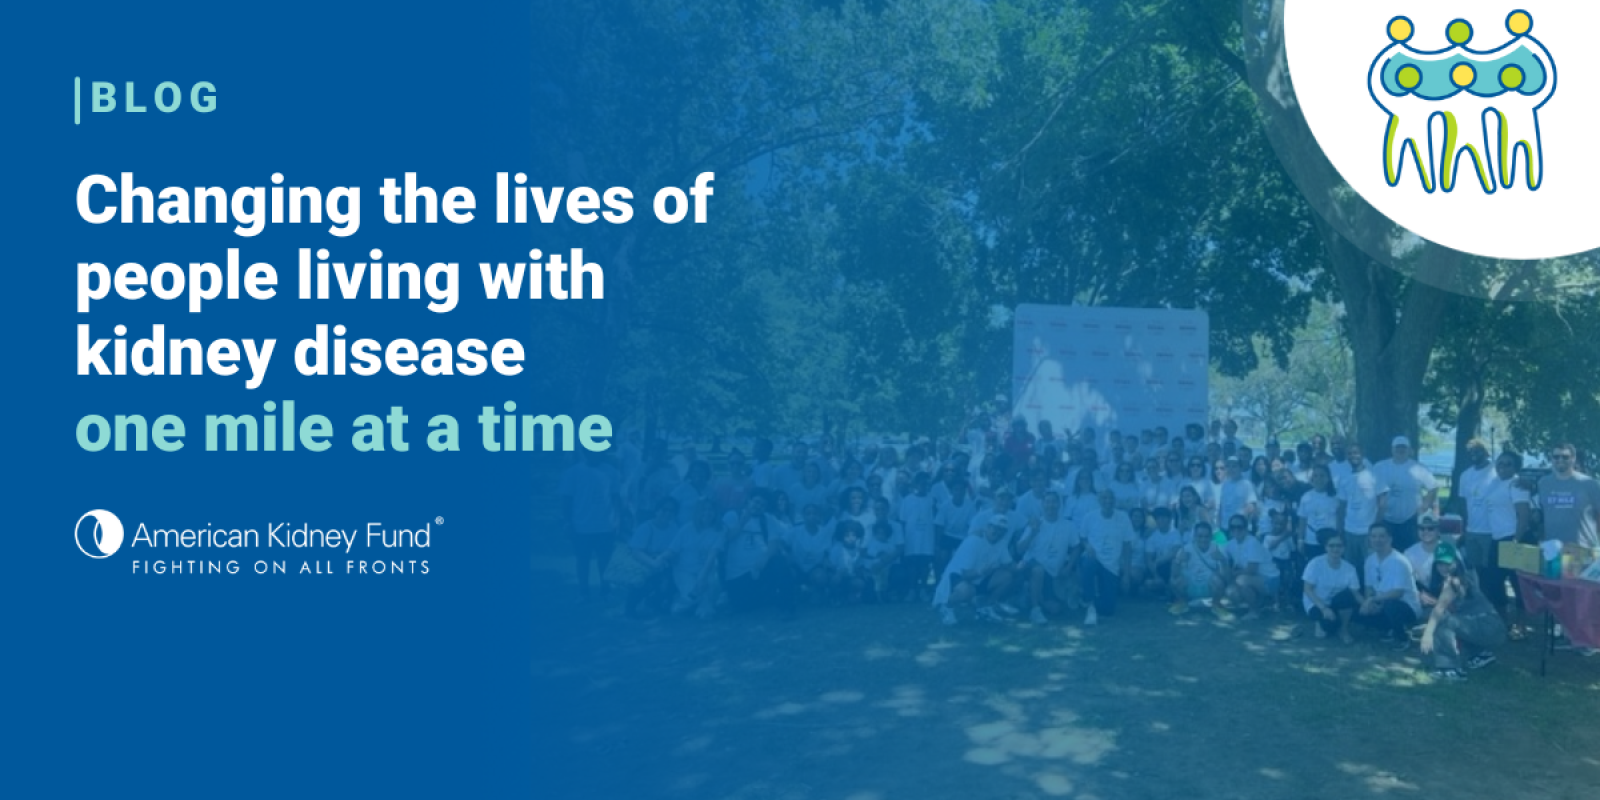 US Renal Care employees at a summer gathering outside with blue text overlay "Changing the lives of people living with kidney disease one mile at a time"